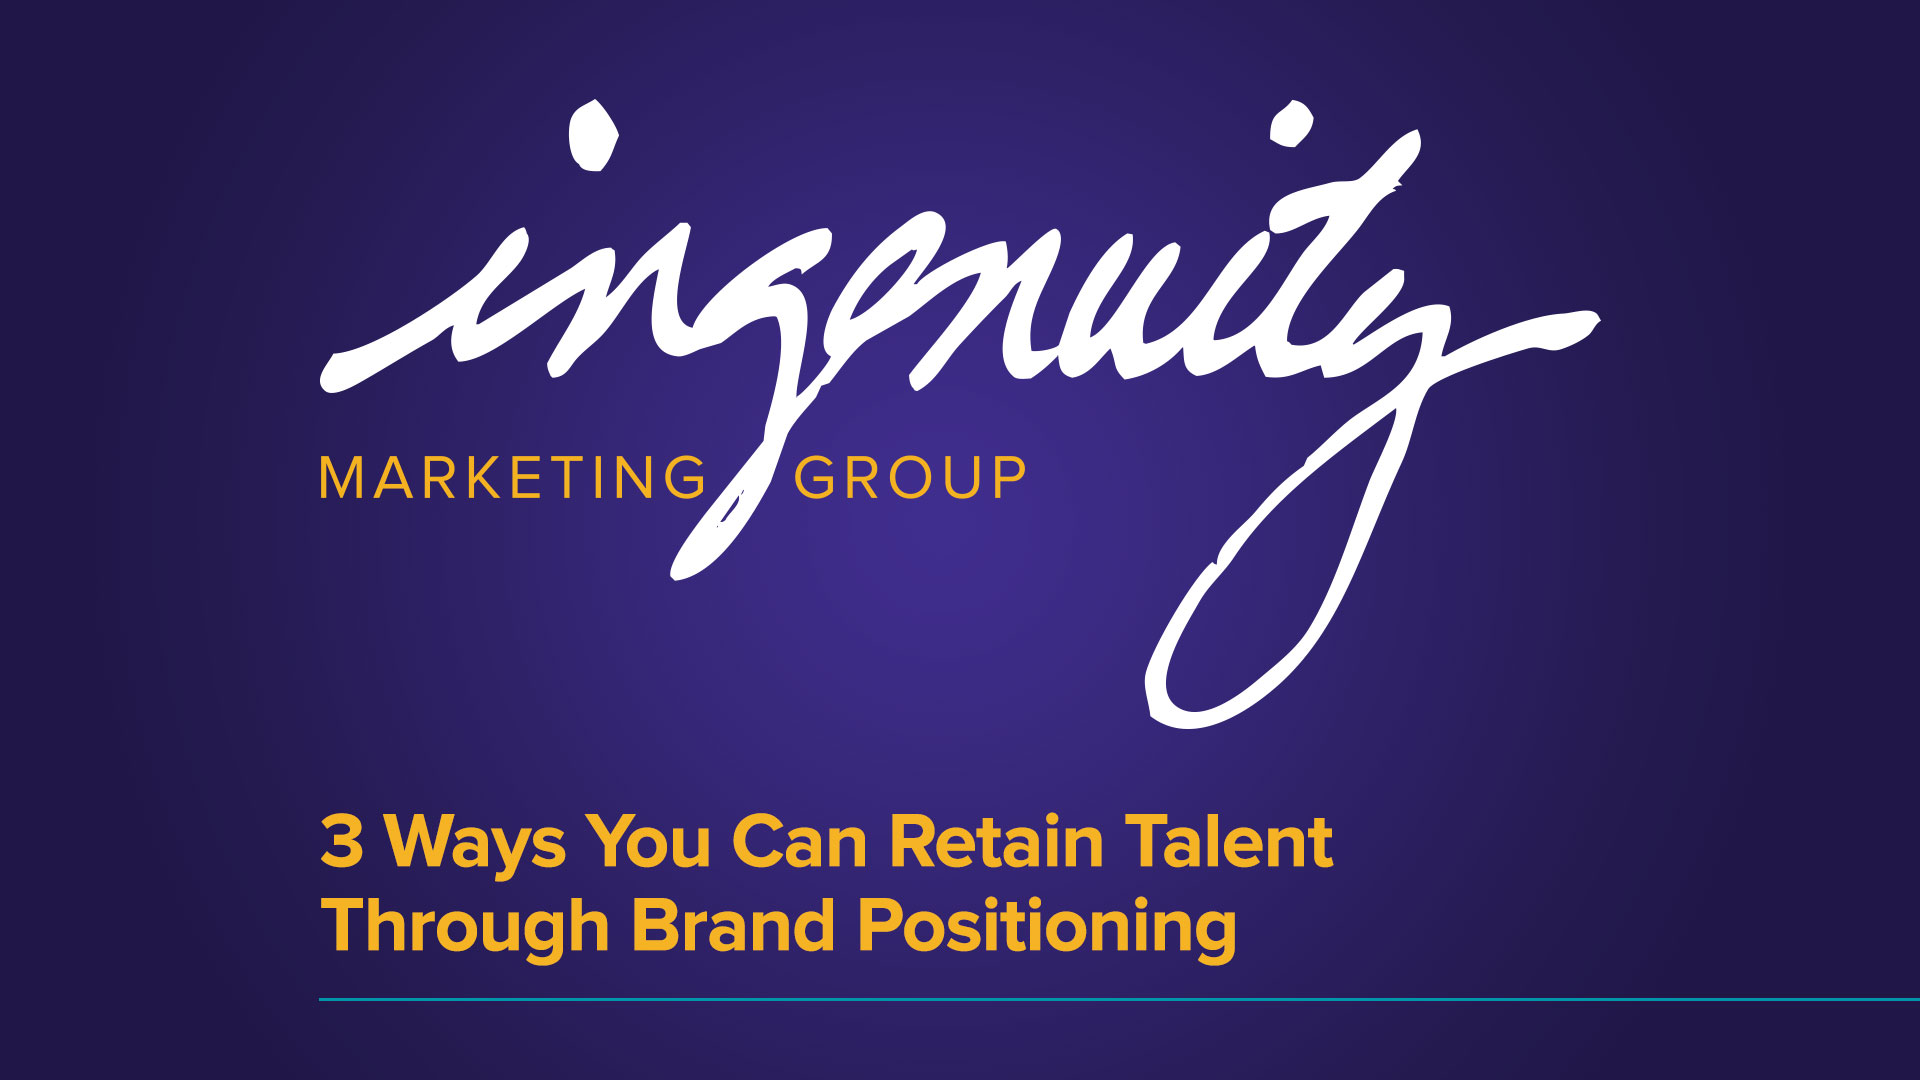 Video title slide for 3 Ways You Can Retain Talent Through Brand Positioning.